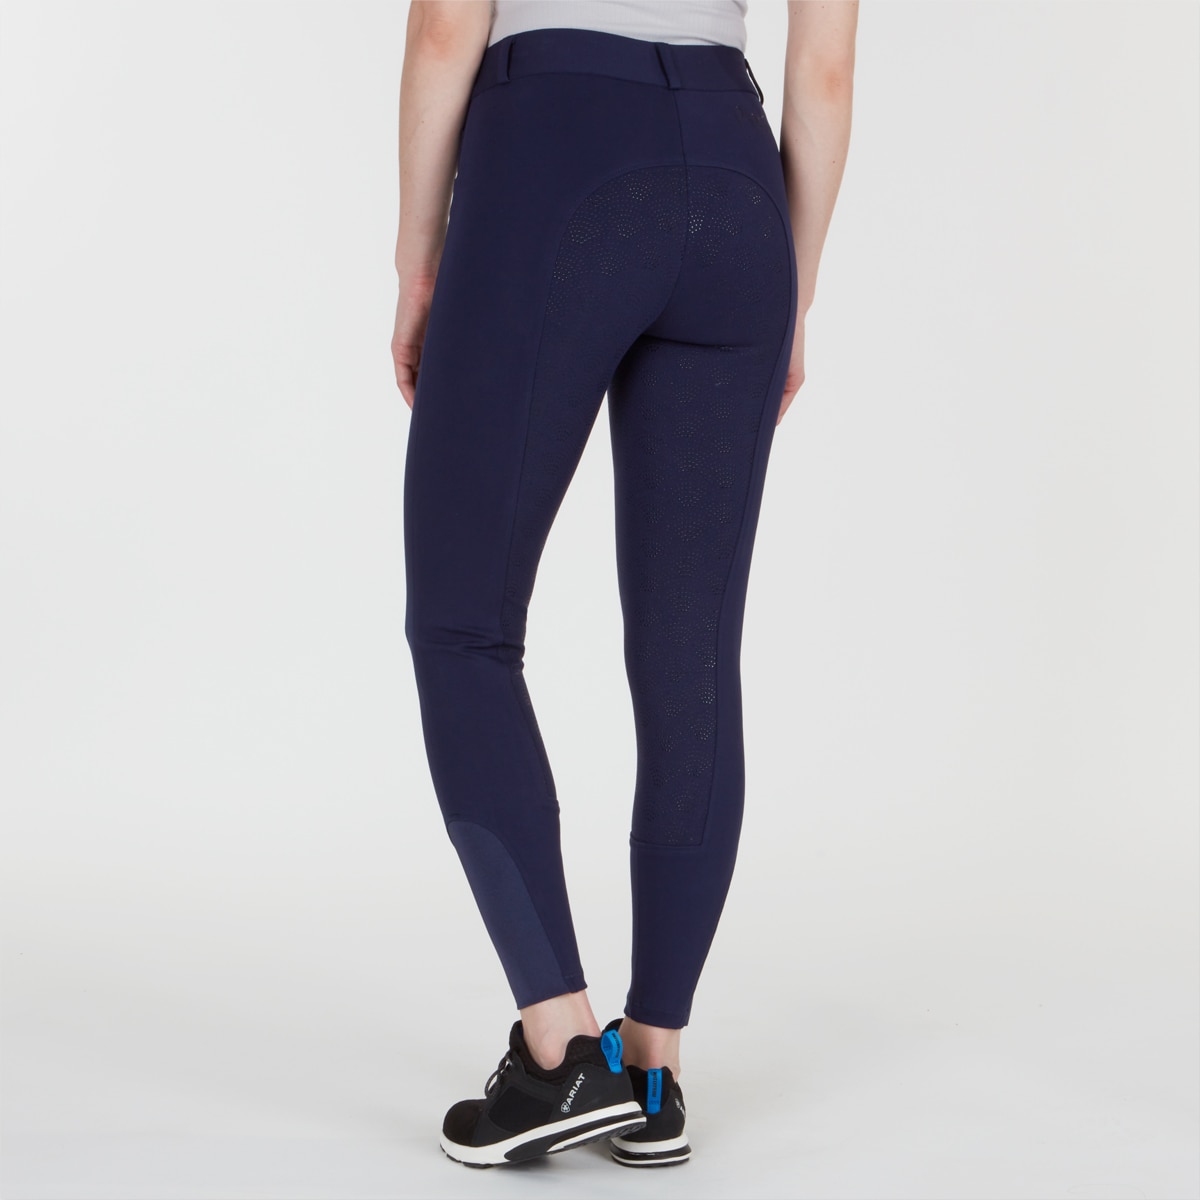 Piper Knit Mid-rise Breeches by SmartPak - Full Seat